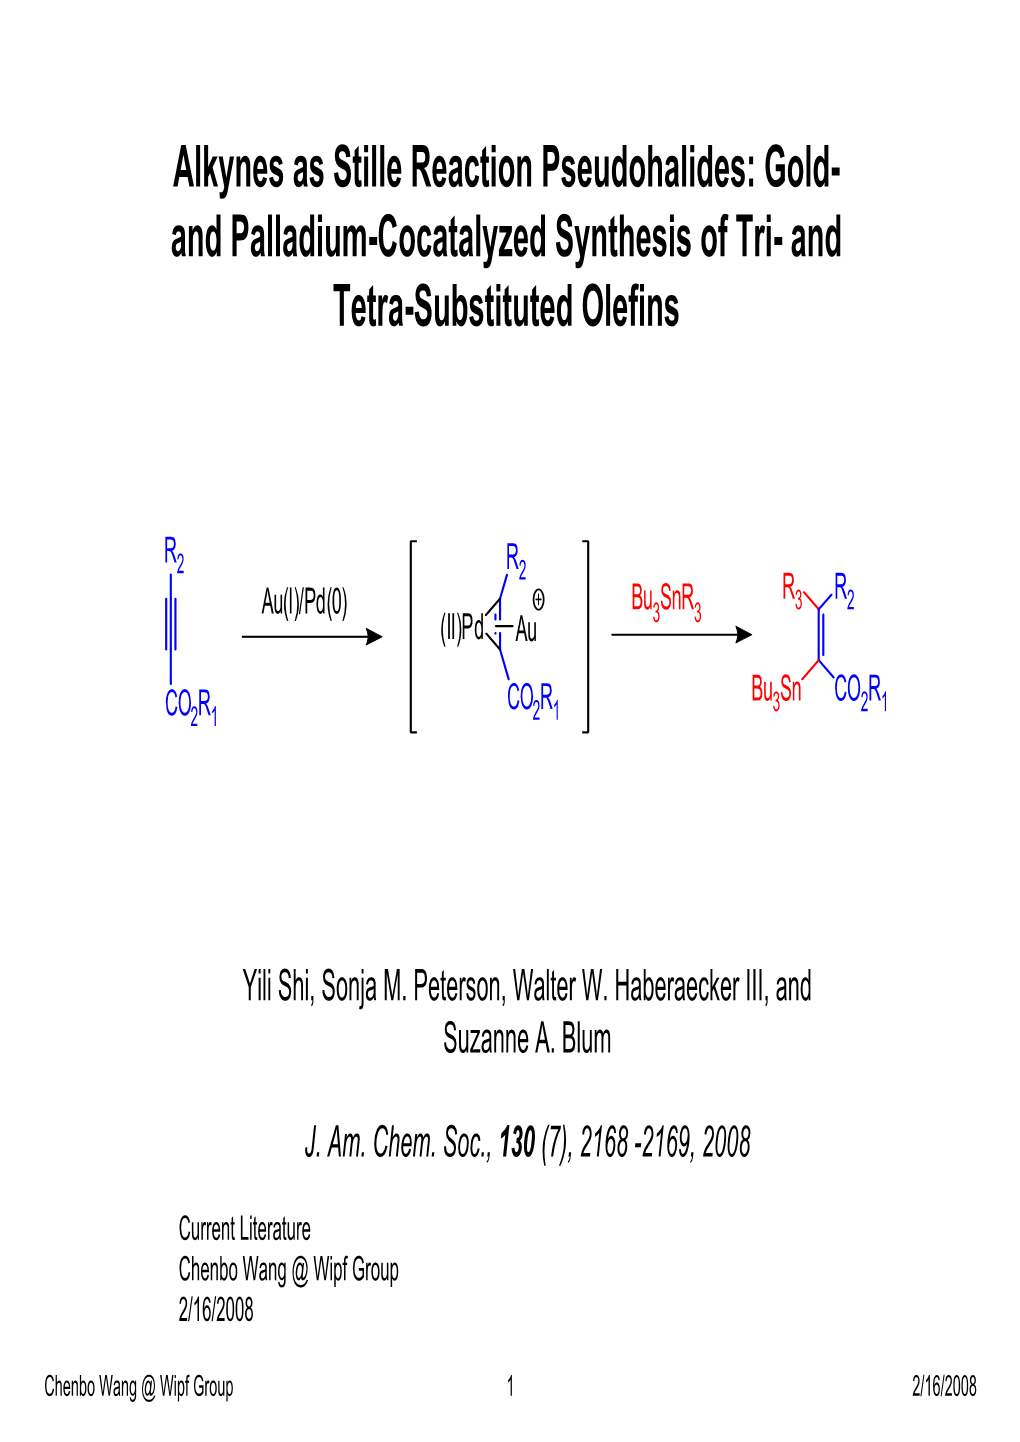 Alkynes As Stille Reaction Pseudohalides: Gold- and Palladium-Cocatalyzed Synthesis of Tri- and Tetra-Substituted Olefins